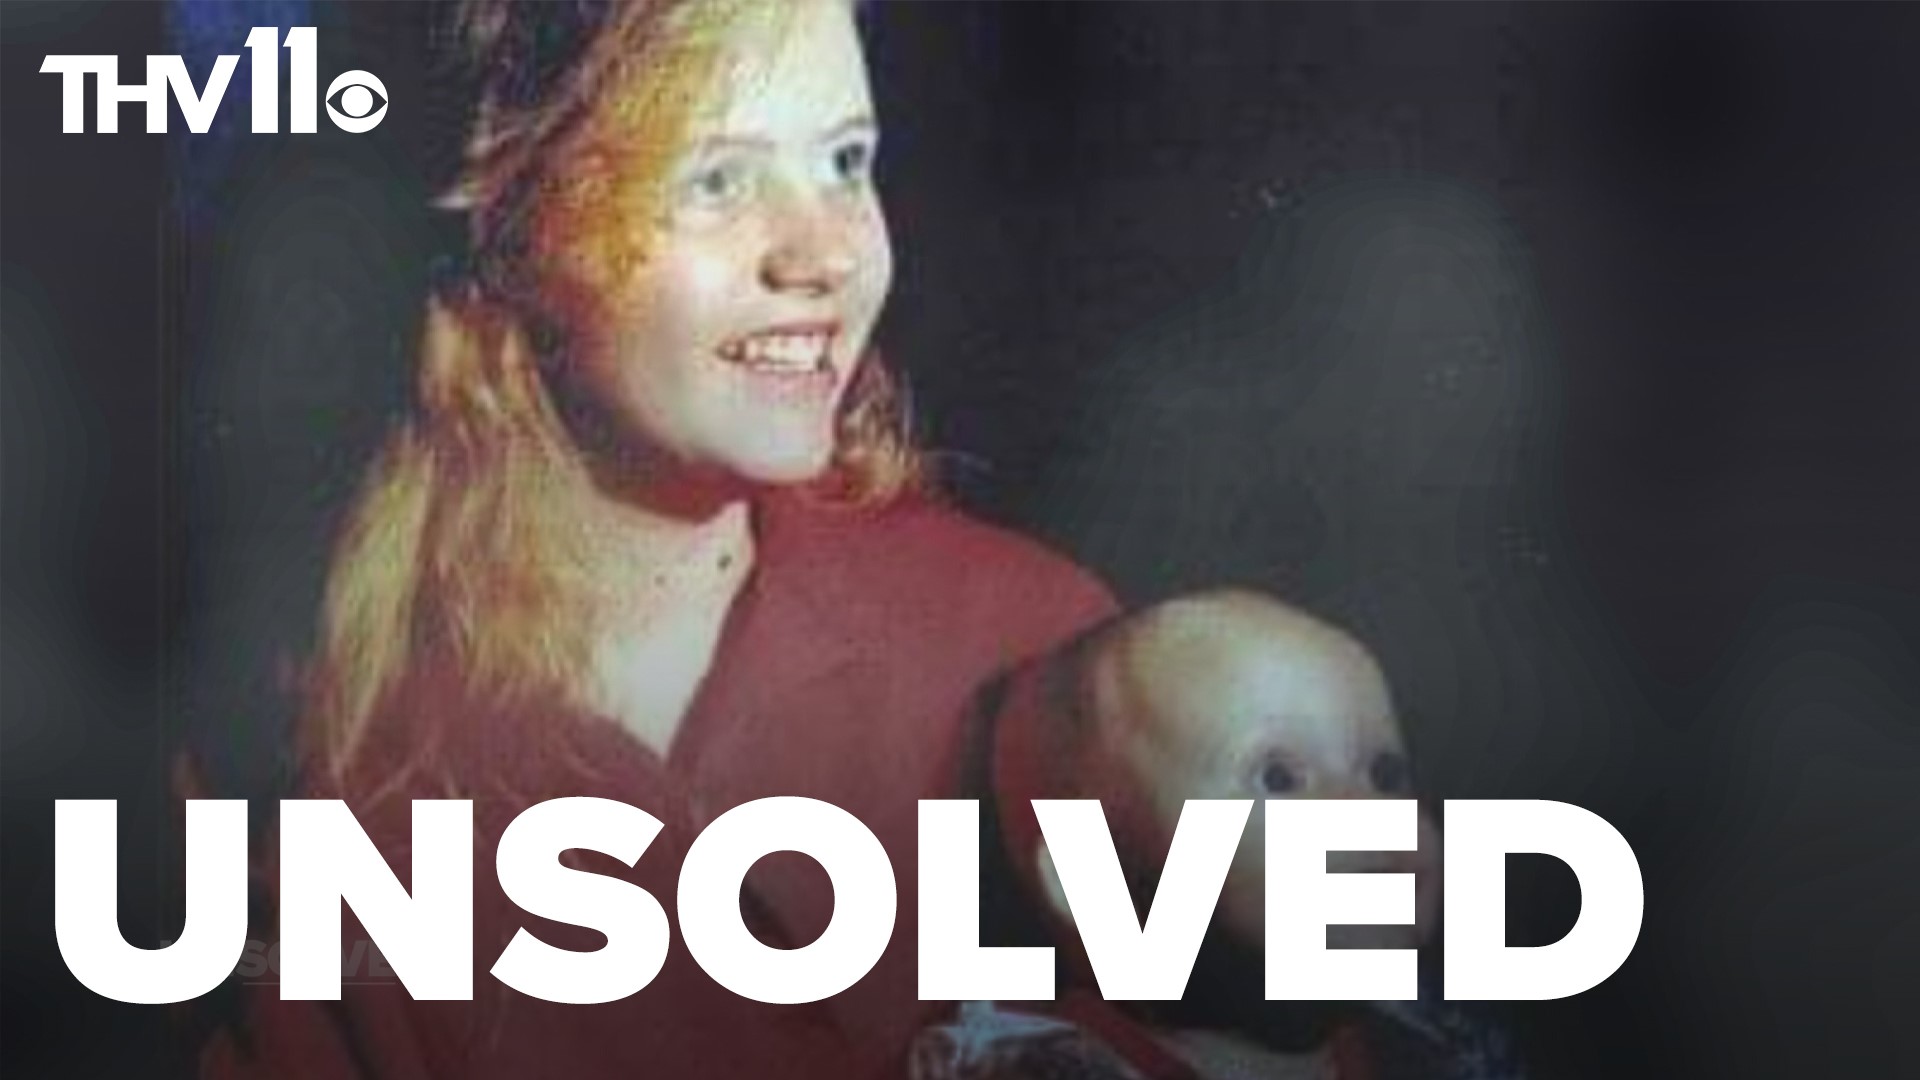 In 1995, two girls from a small Arkansas town vanished. Two teens were arrested for one of the murders, but the other case remains unsolved.